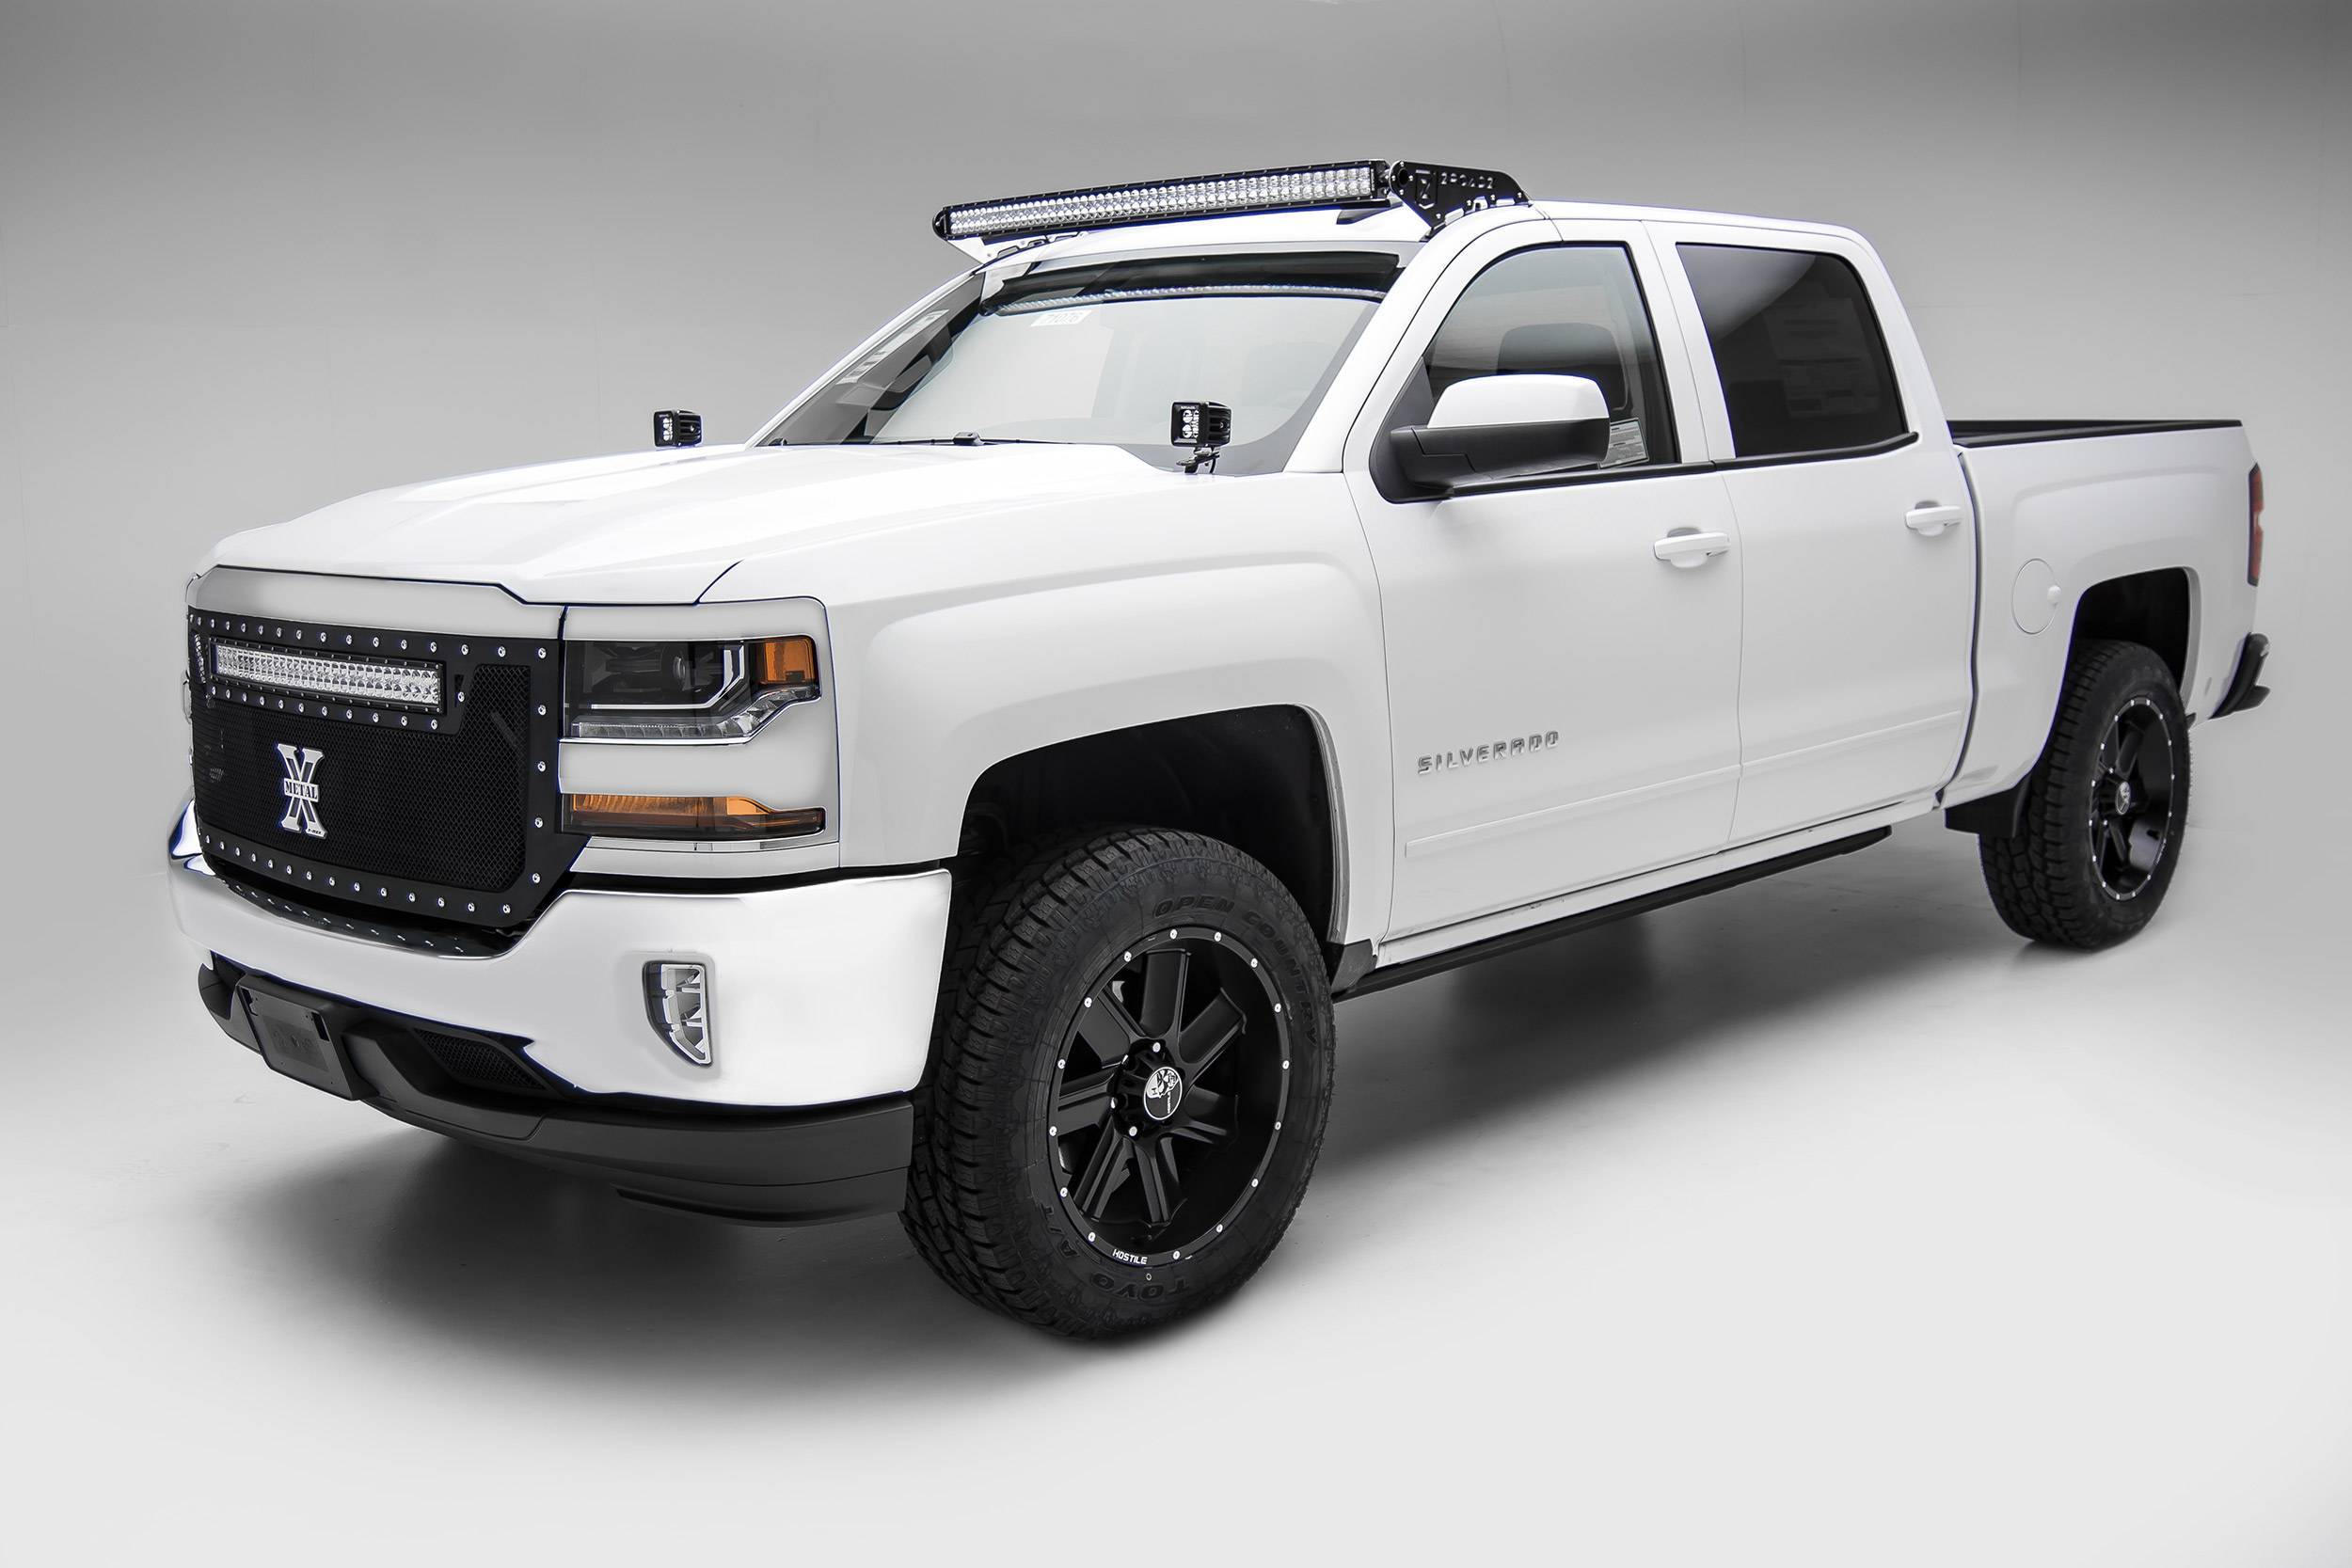 ZROADZ OFF ROAD PRODUCTS - Silverado, Sierra Front Roof LED Bracket to mount 50 Inch Curved LED Light Bar - Part # Z332281